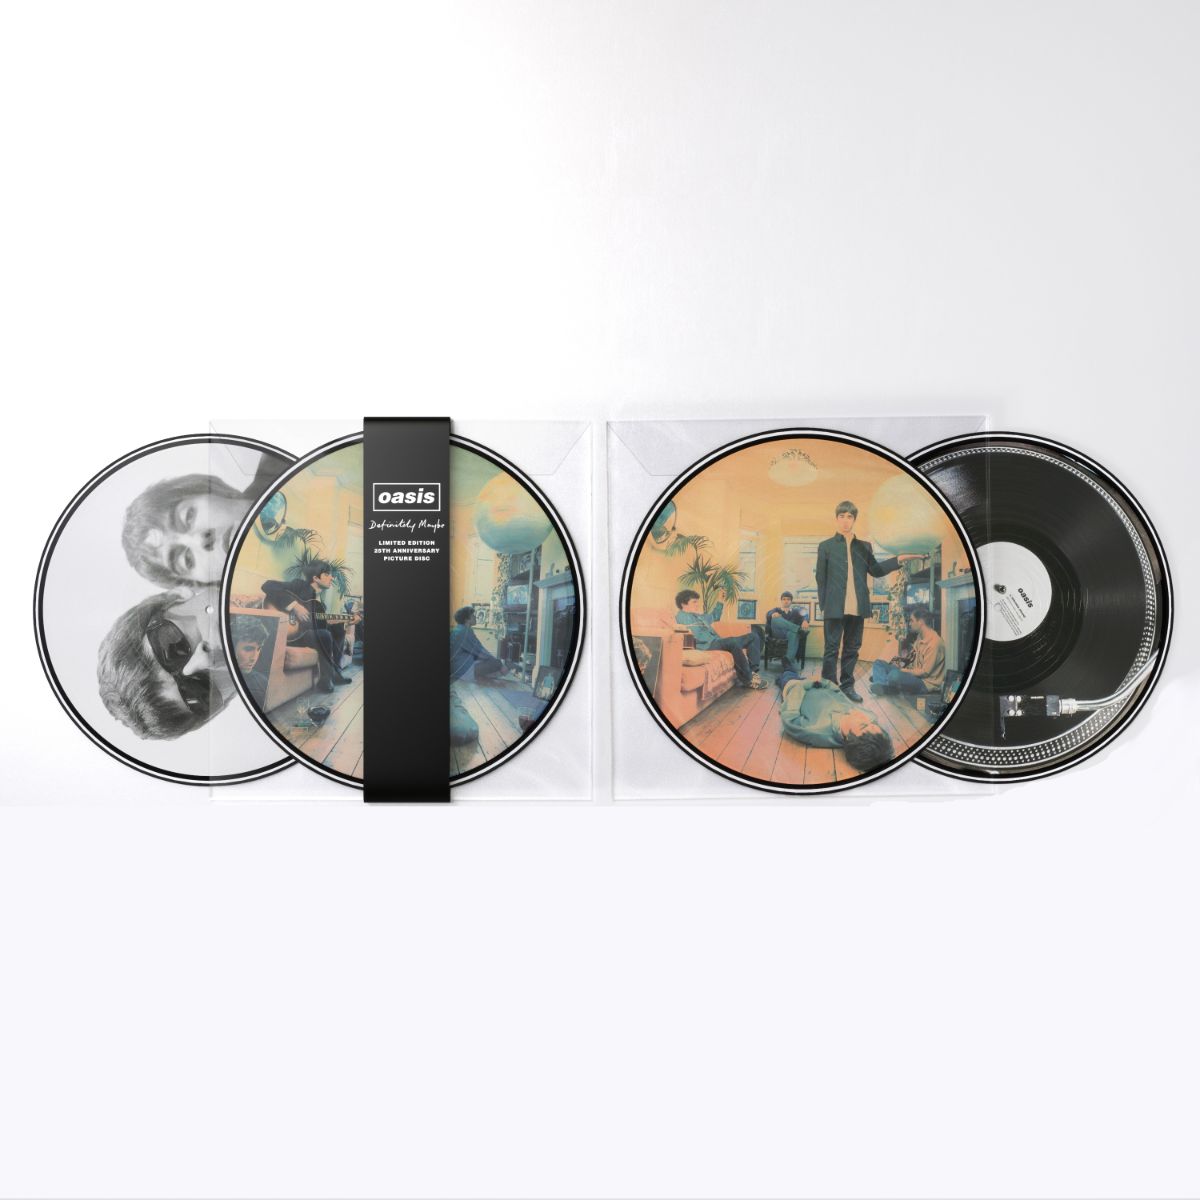 Skifte tøj reagere kopi Two limited vinyl LPs of 'Definitely Maybe' are being released to mark the  25th anniversary of Oasis' debut album